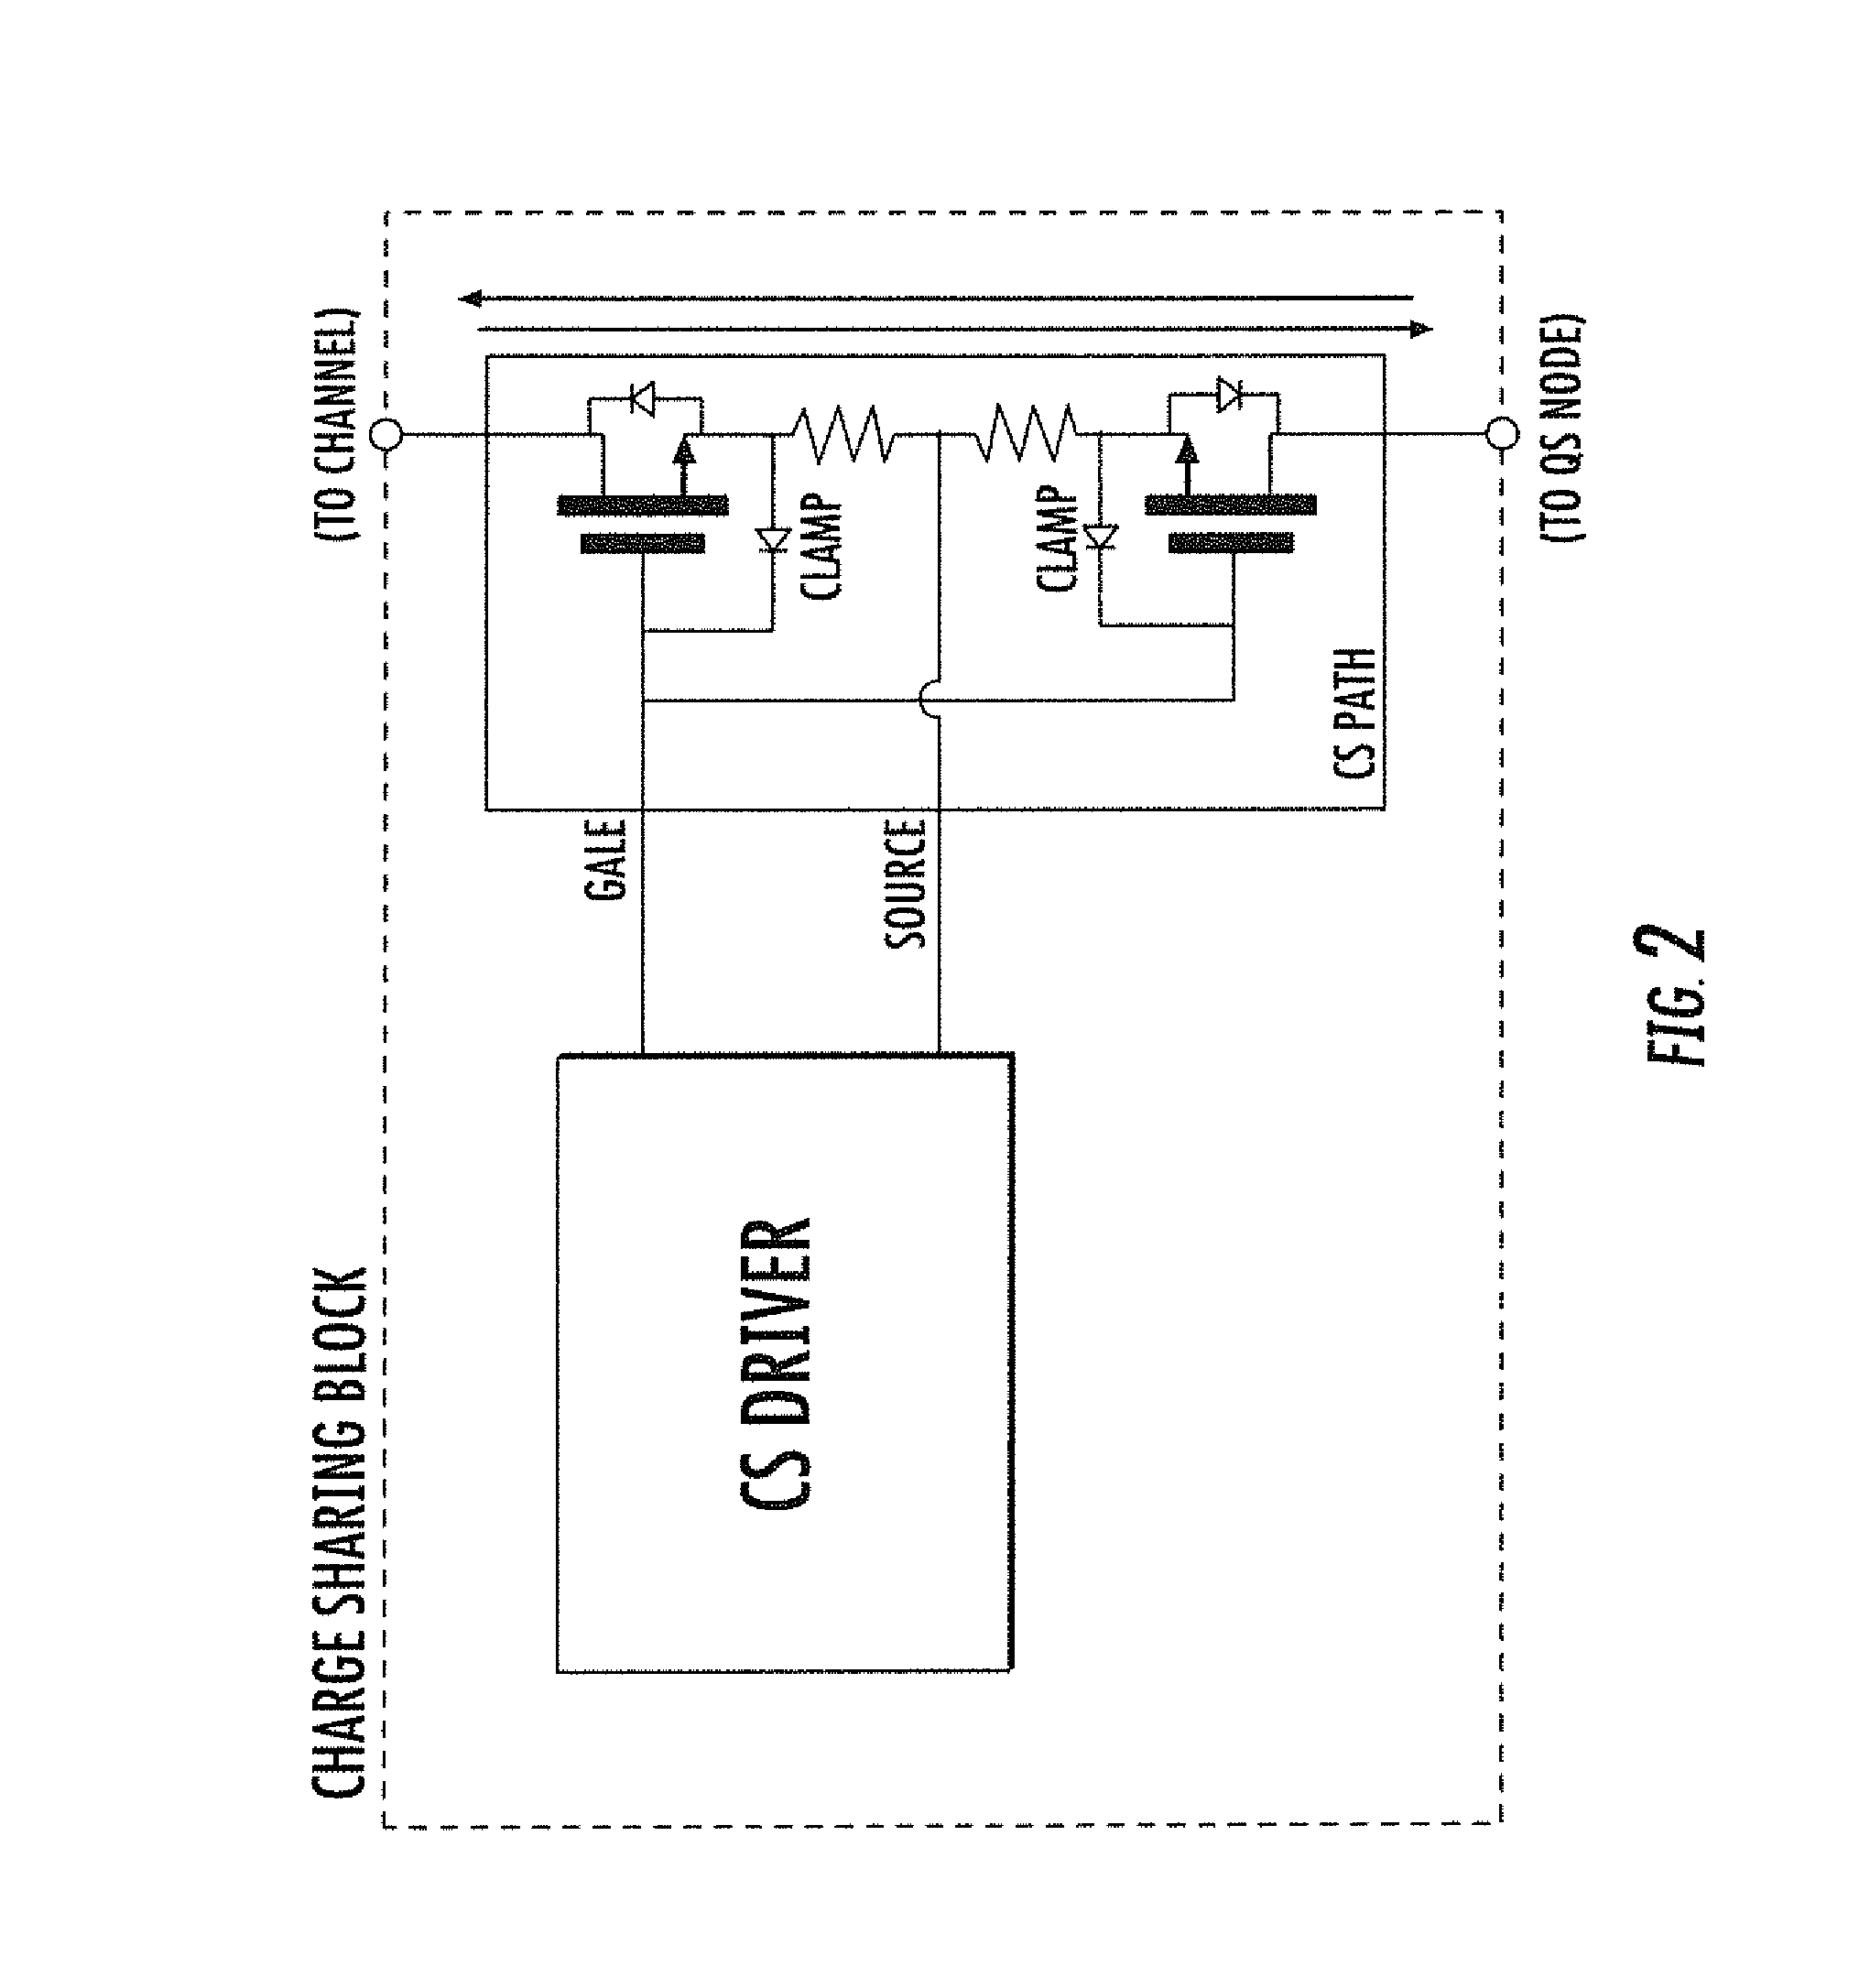 Charge-sharing path control device for a scan driver of an LCD panel